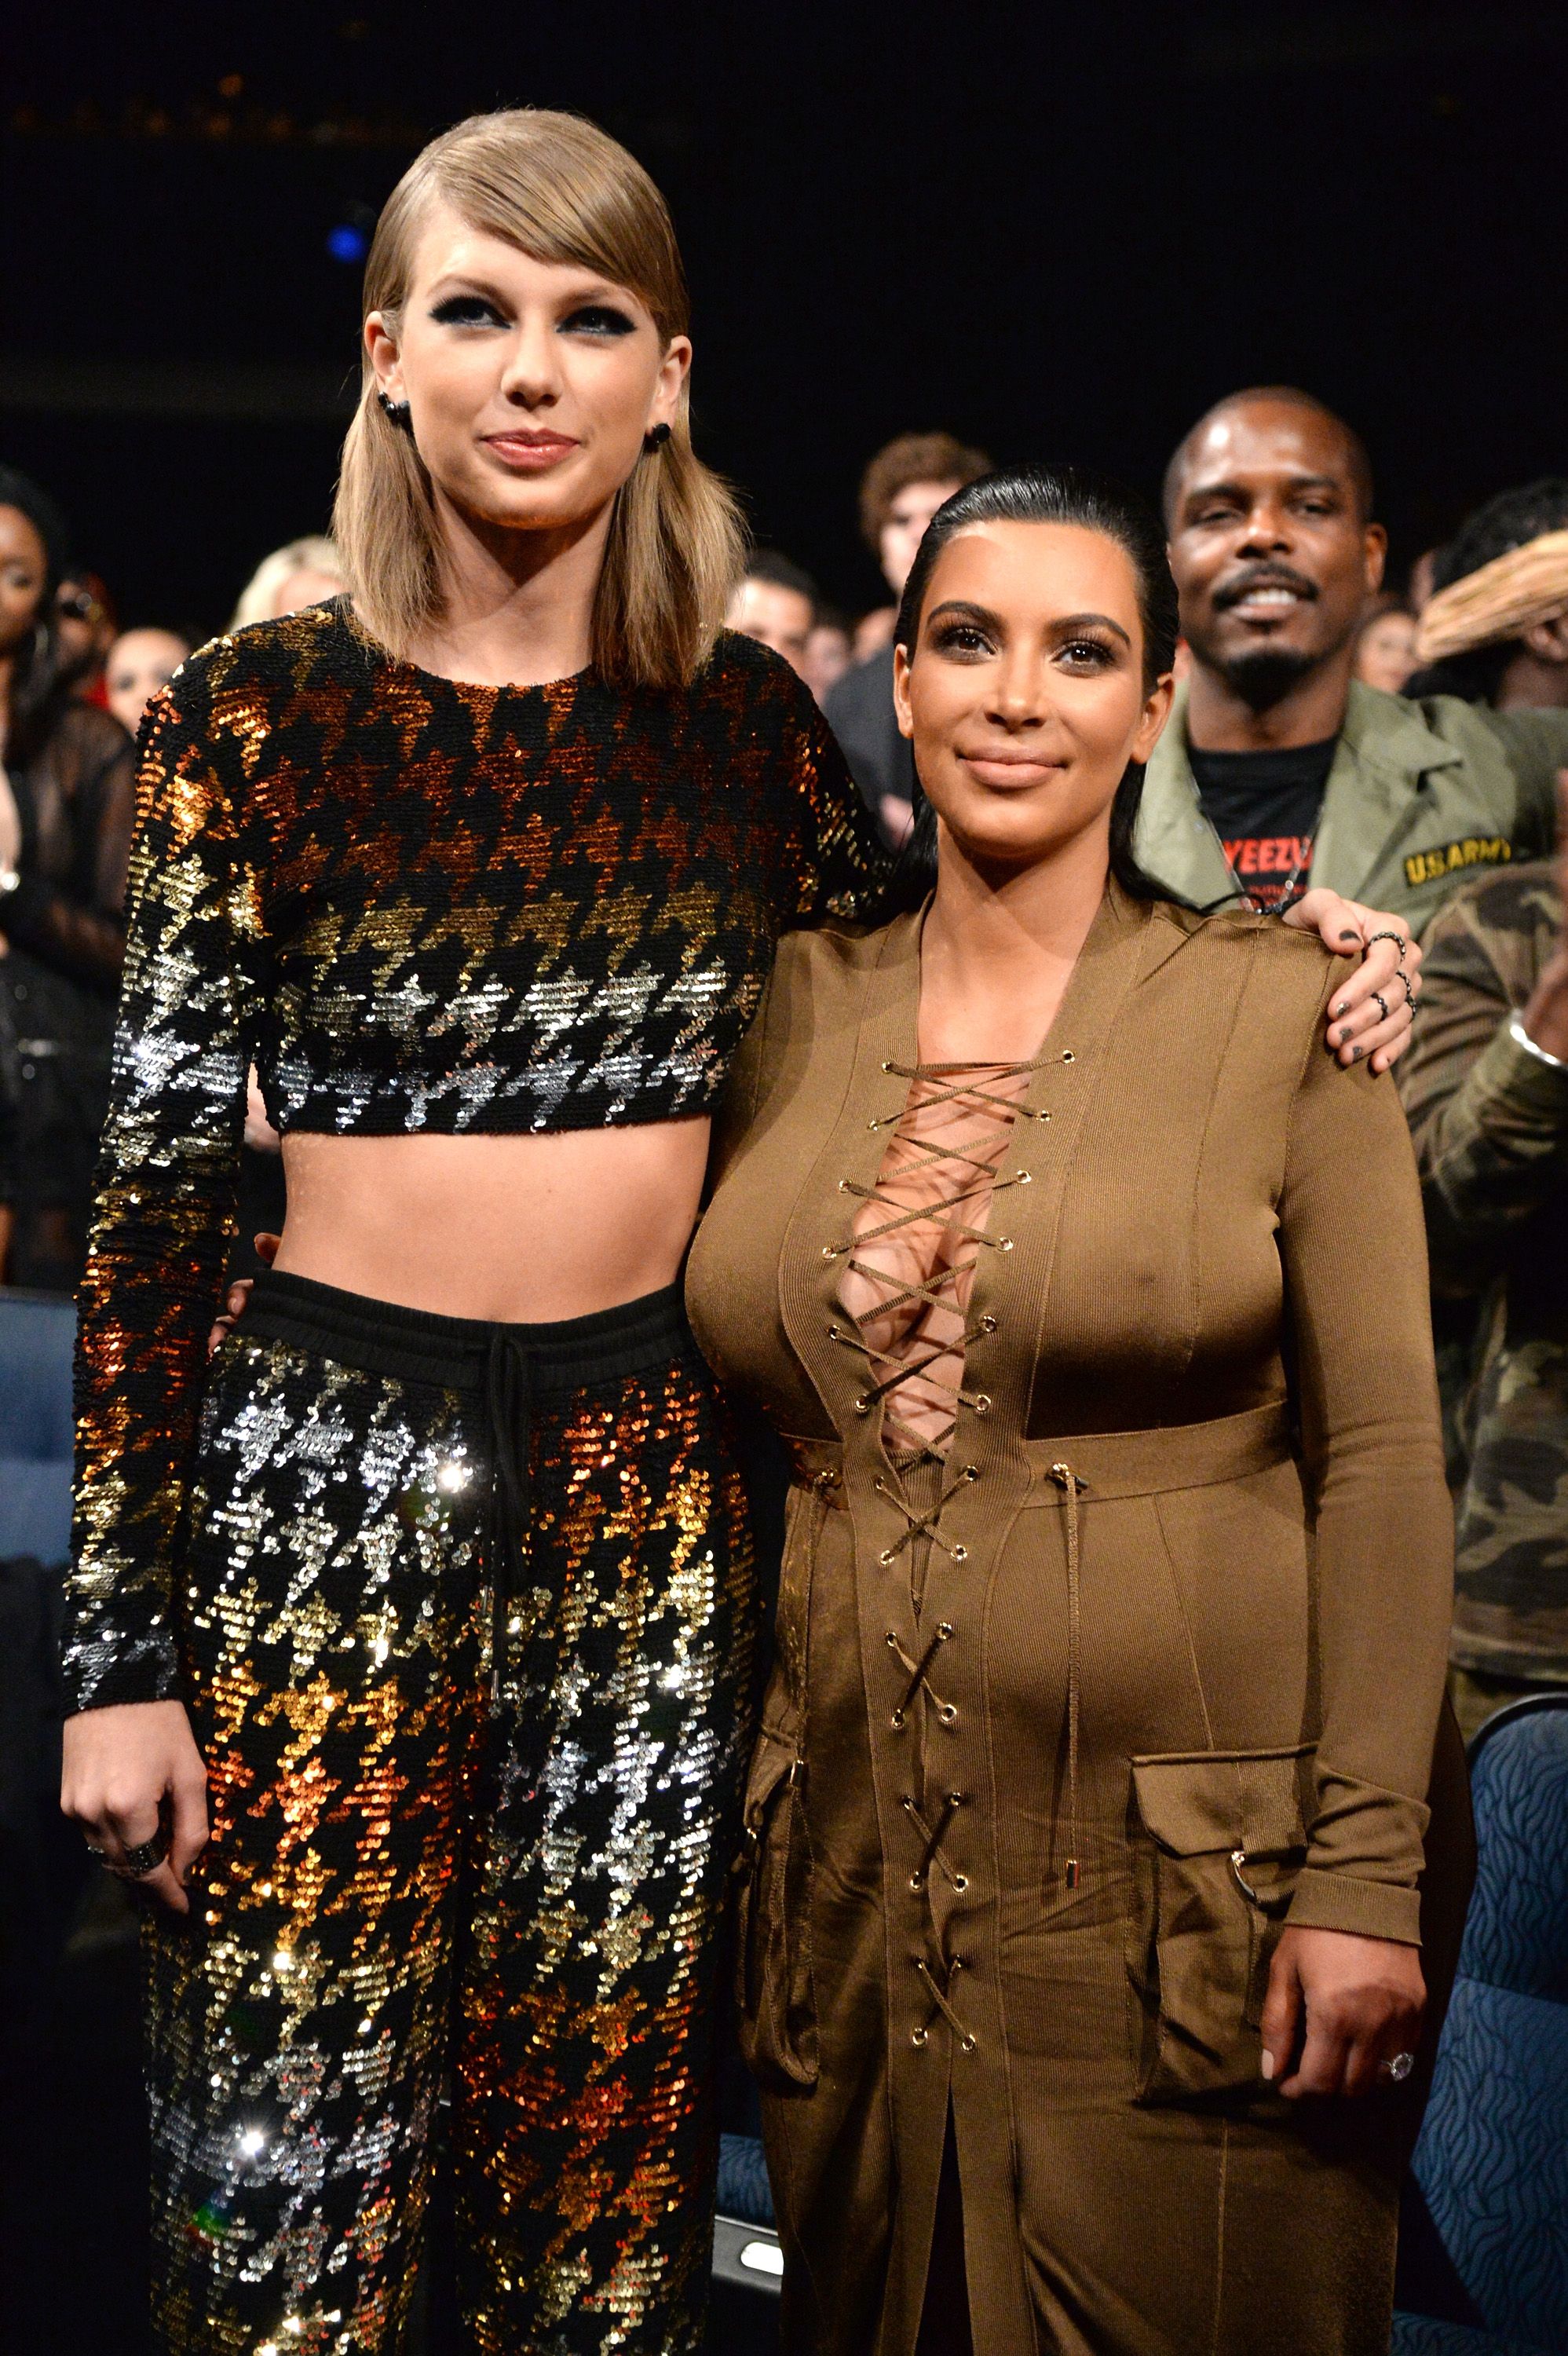 kim-kardashian-under-fire-after-infamous-phone-call-with-taylor-swift-leaks-3